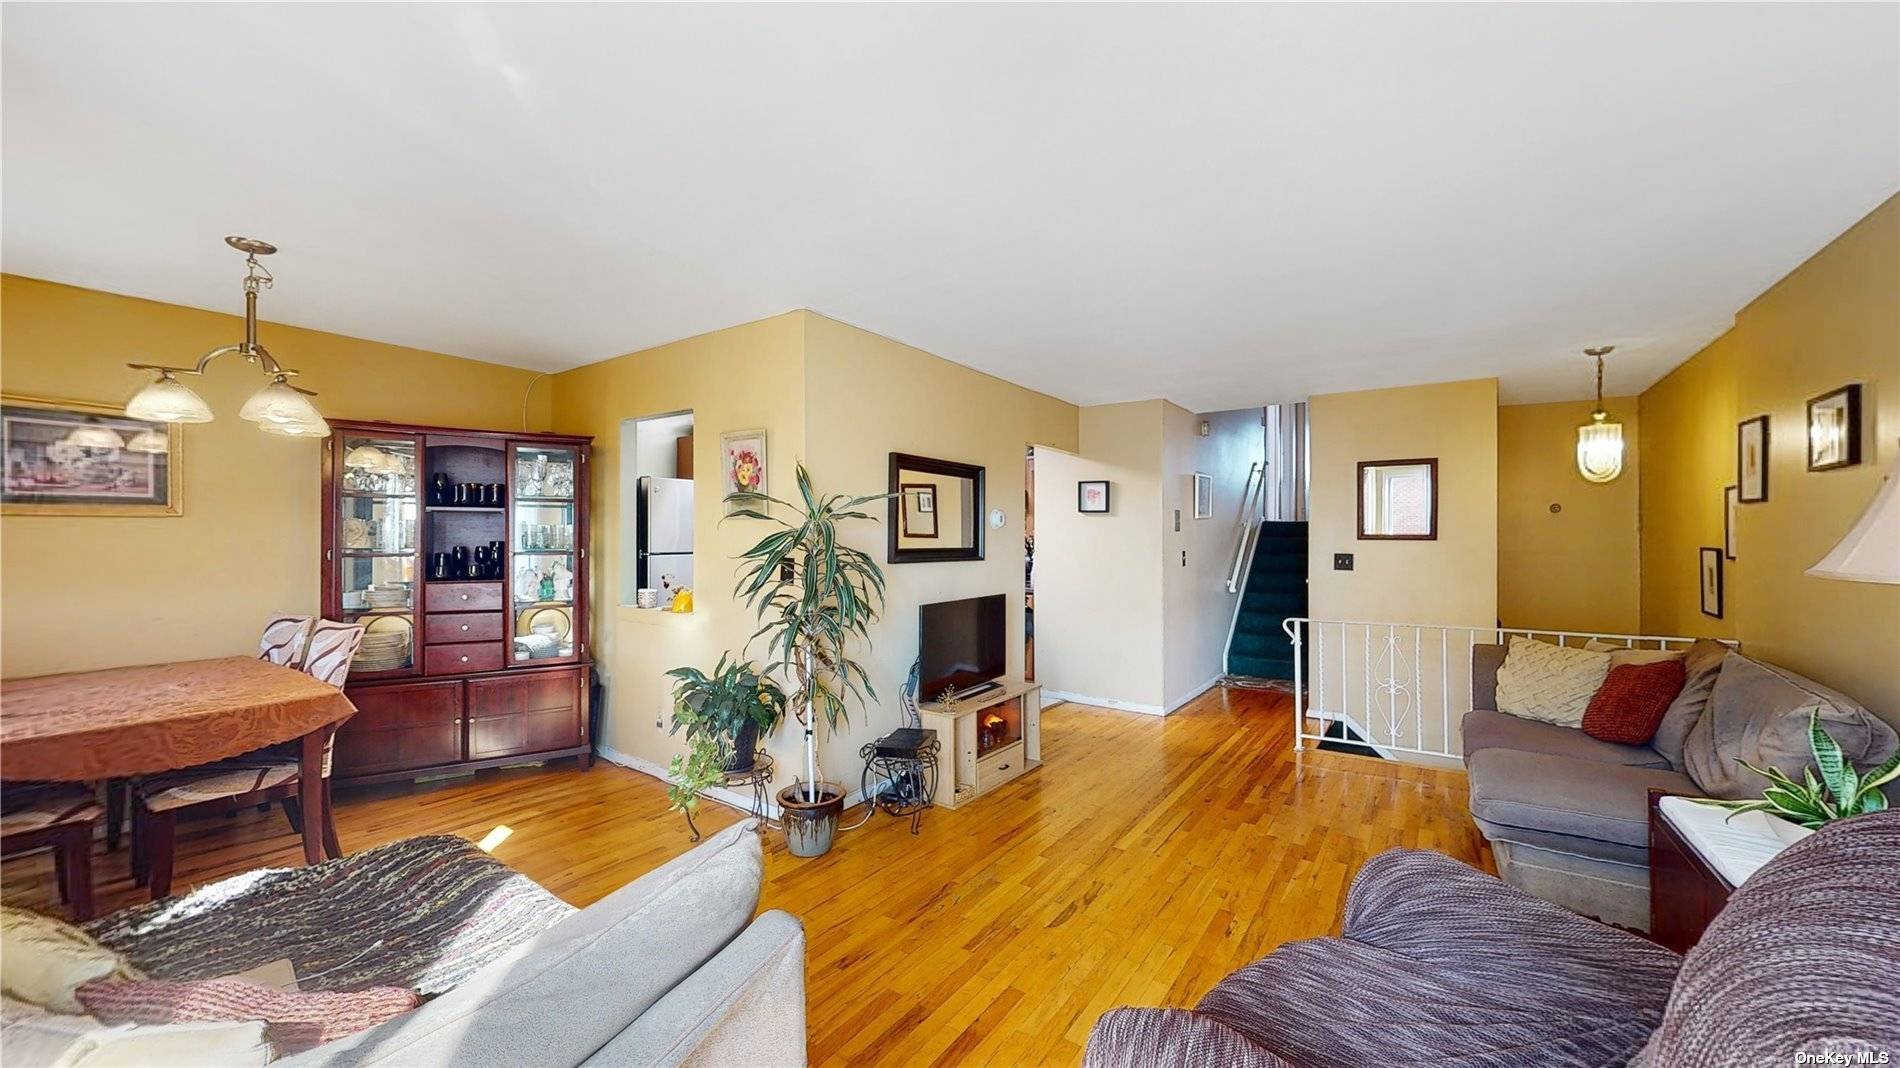 Welcome to this charming 3 bed 2 bath duplex condo.